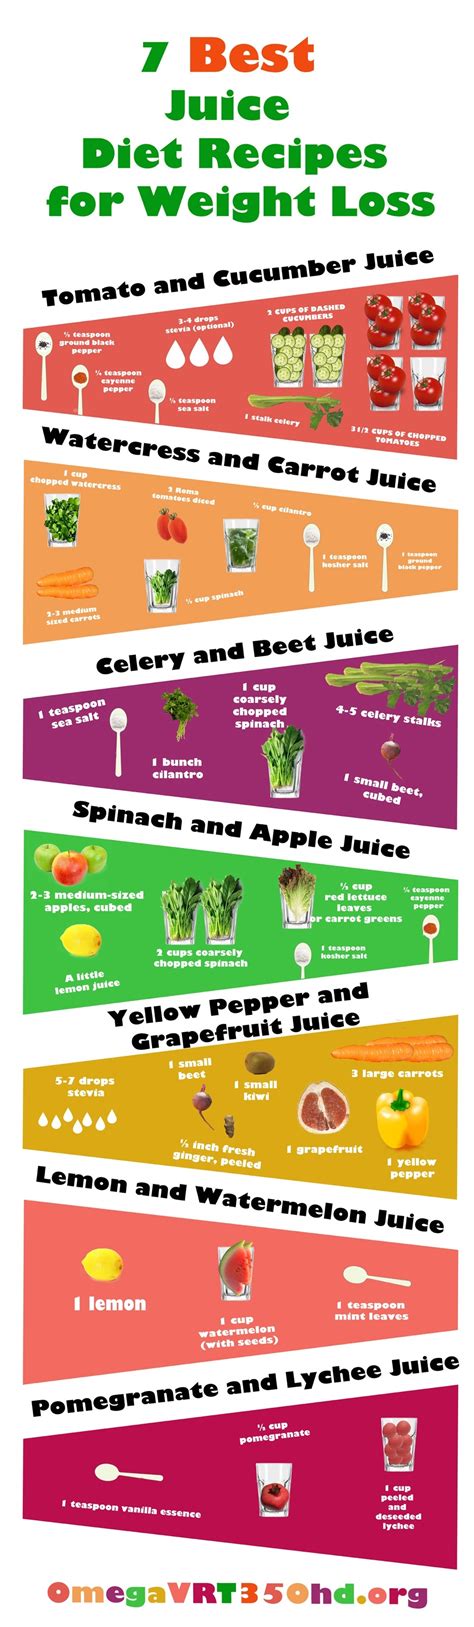 If you want to get delicious, quick and easy juicing recipes than this book is for you. 7 Simple Juicing Recipes for Weight Loss (Infographic)